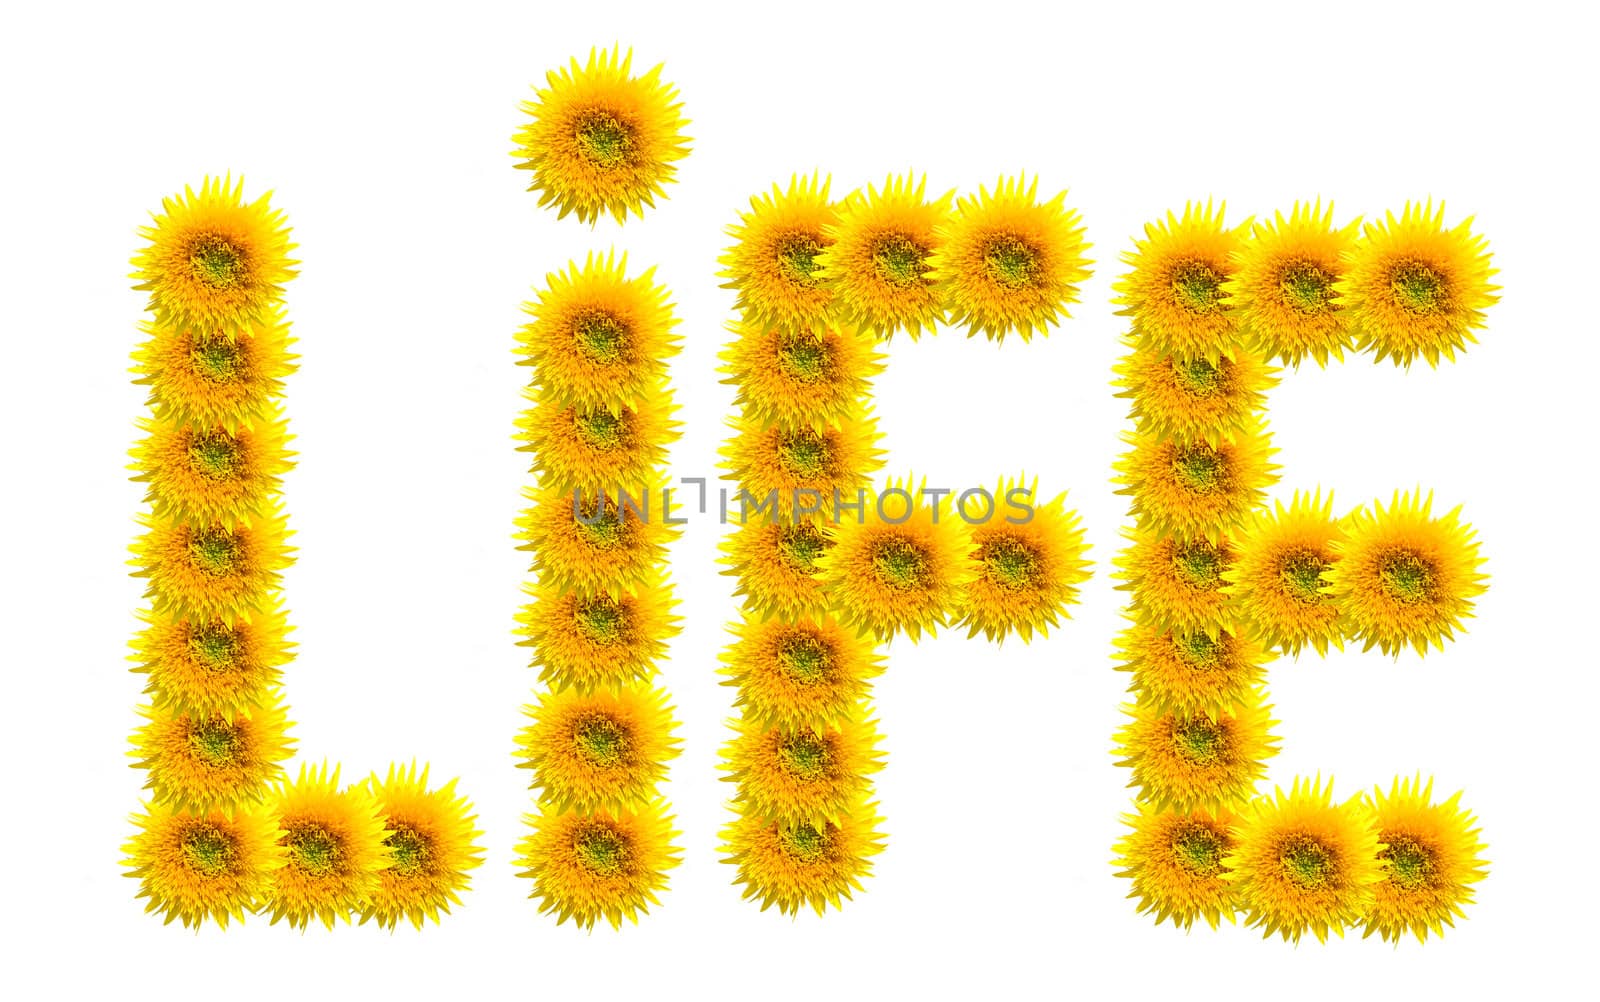 Concept shot of composited sunflowers depicting the word life.